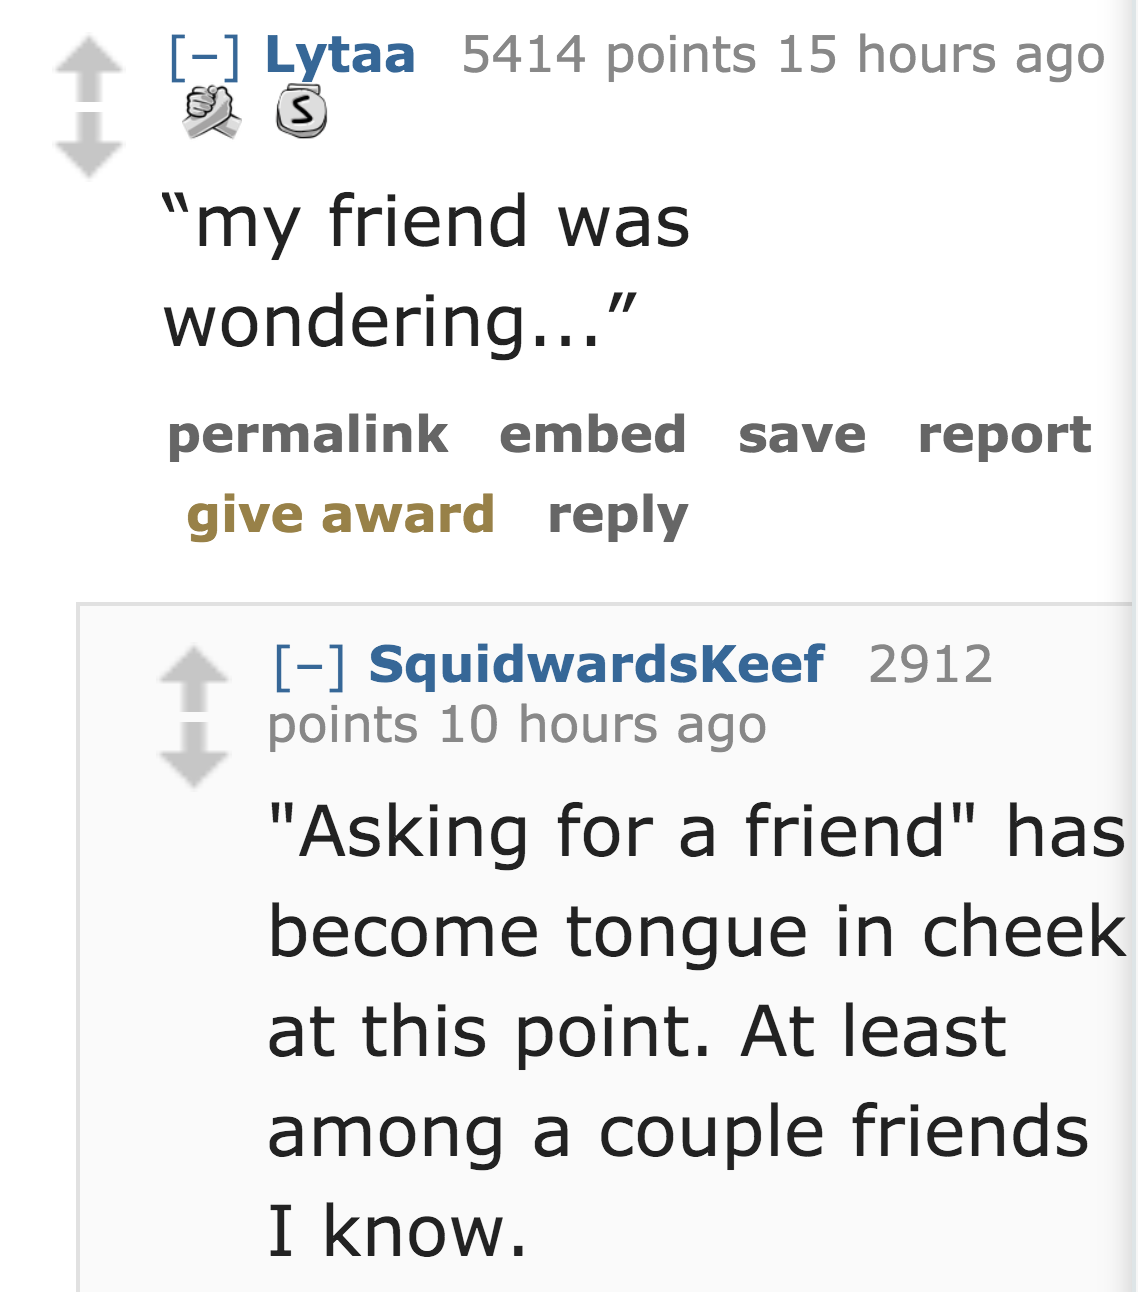 scientist - Lytaa 5414 points 15 hours ago aytaa "my friend was wondering..." permalink embed save report give award Squidwardskeef 2912 points 10 hours ago "Asking for a friend" has become tongue in cheek at this point. At least among a couple friends I 